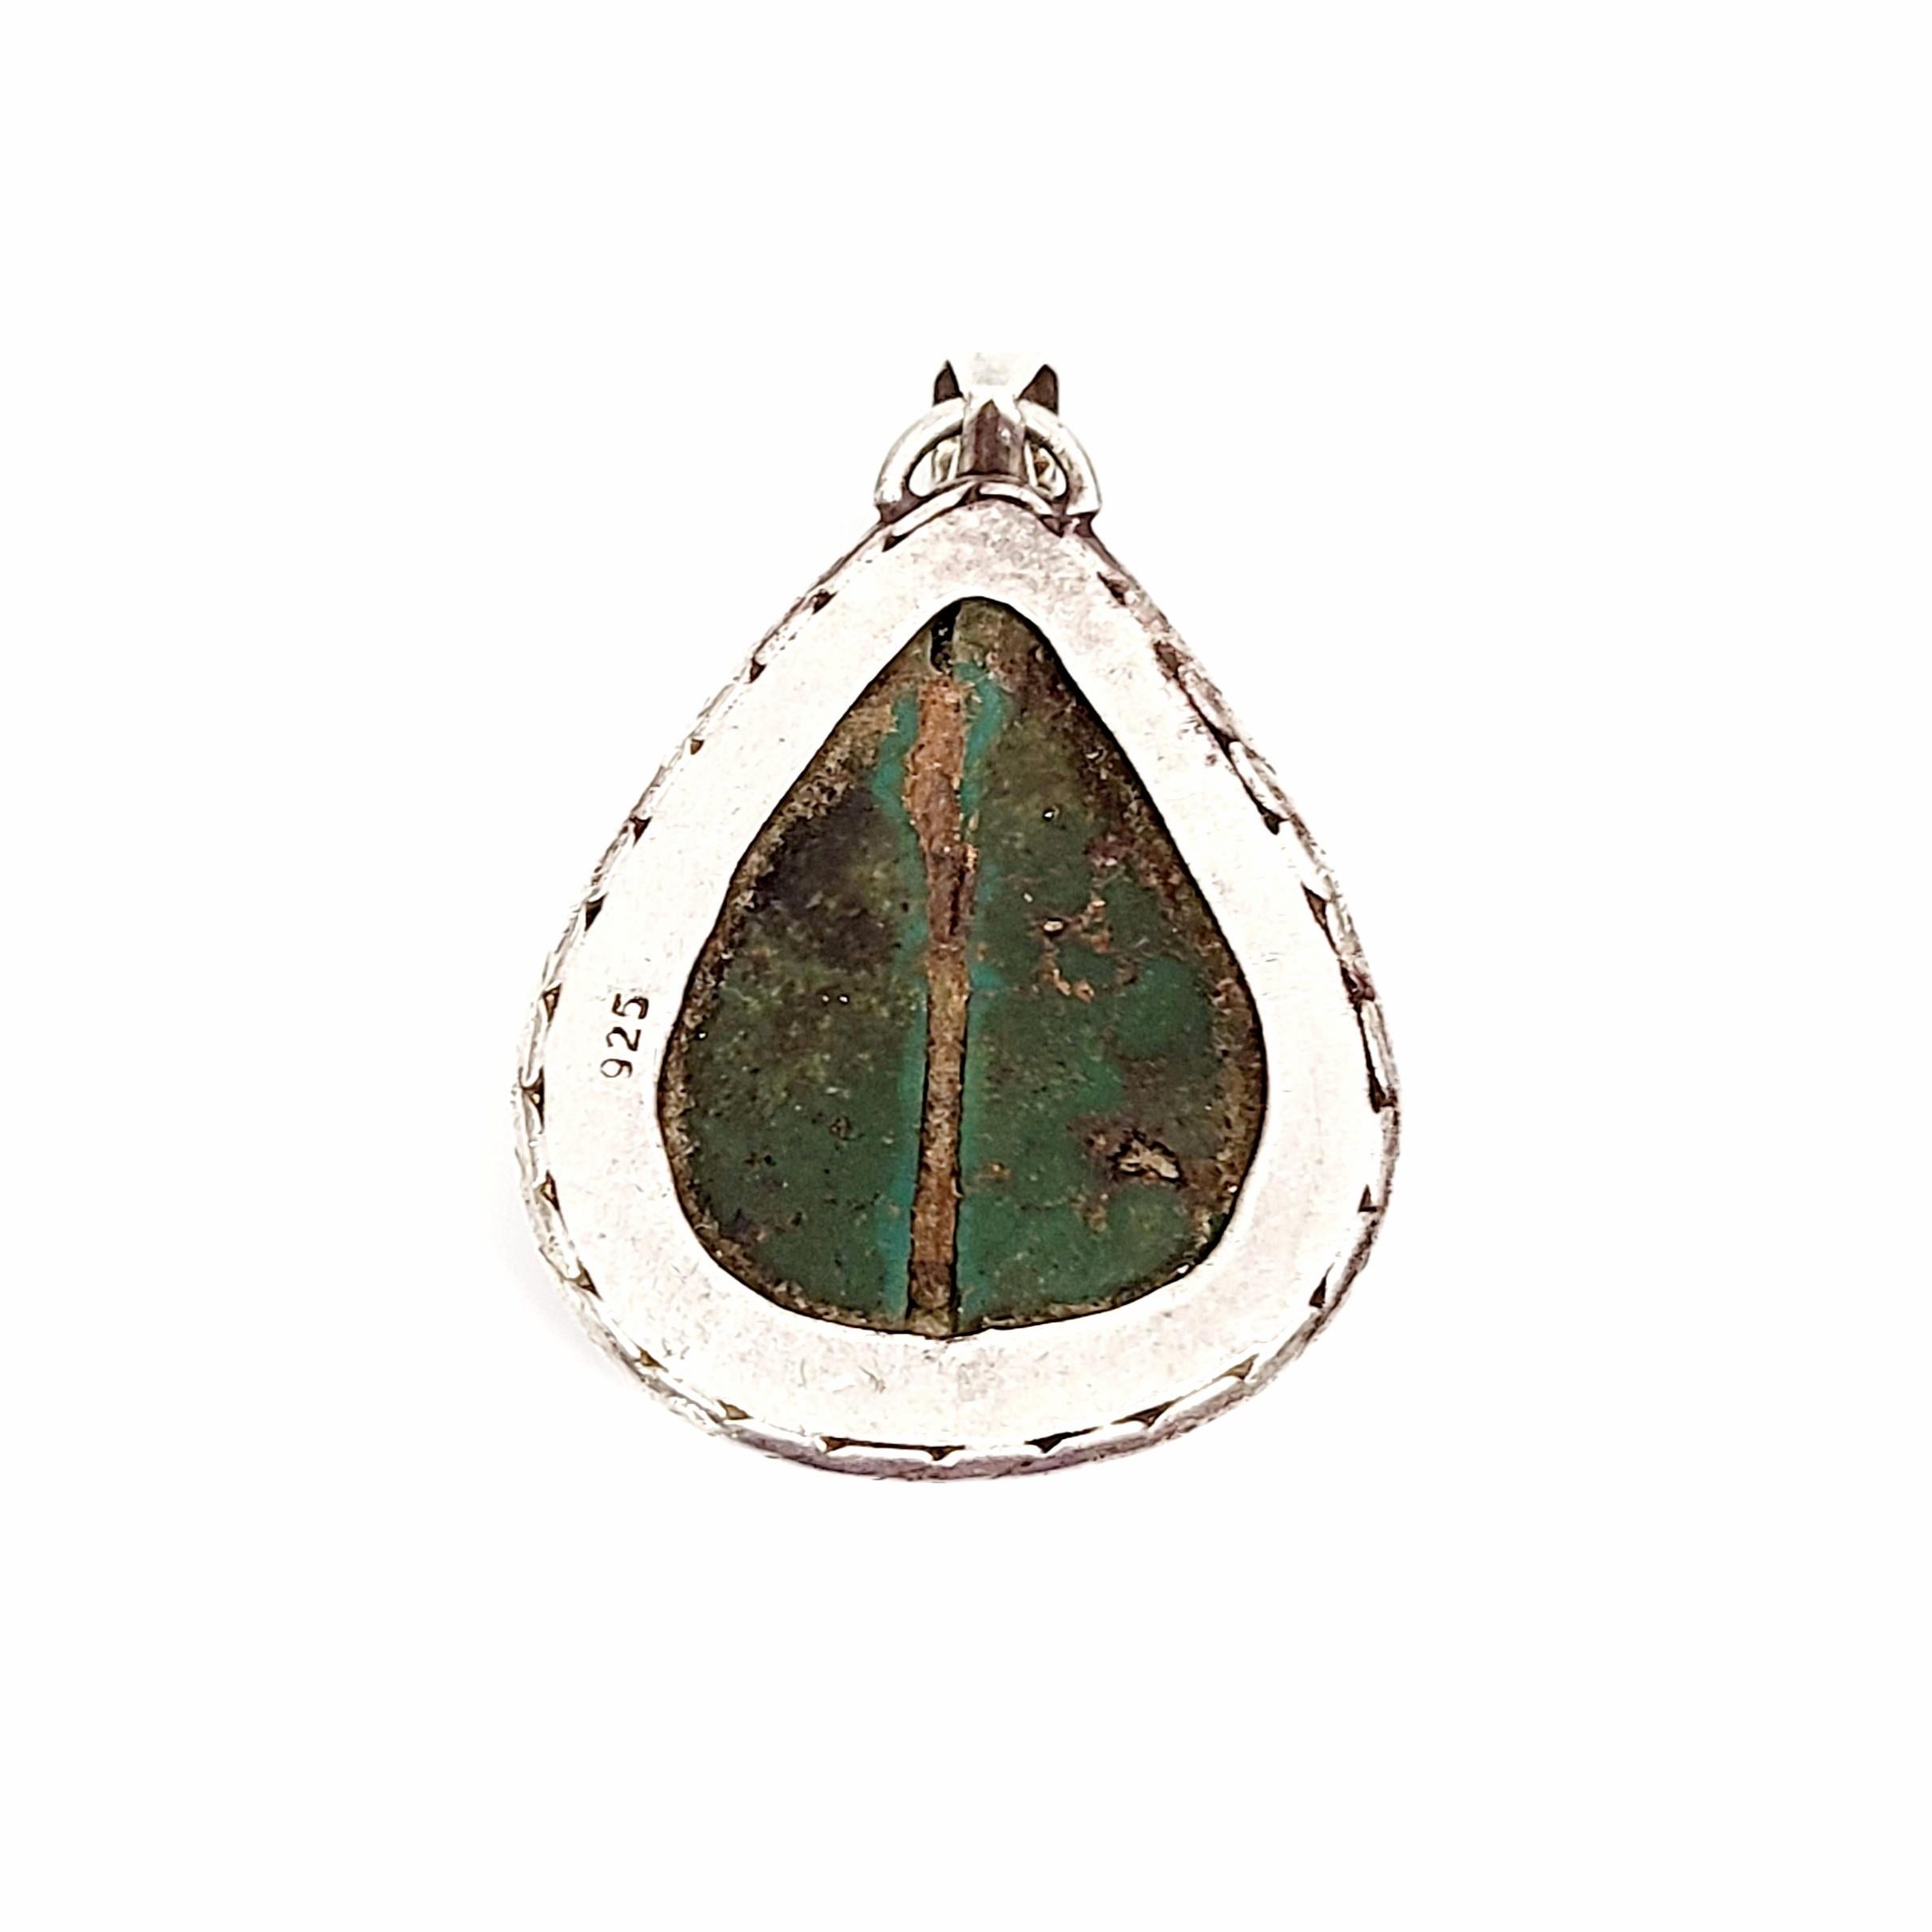 Sterling silver and pilot mountain turquoise large pendant.

A large, beautifully matrixed pilot mountain turquoise stone is bezel set in a twisted frame.

Measures approx 1 3/4